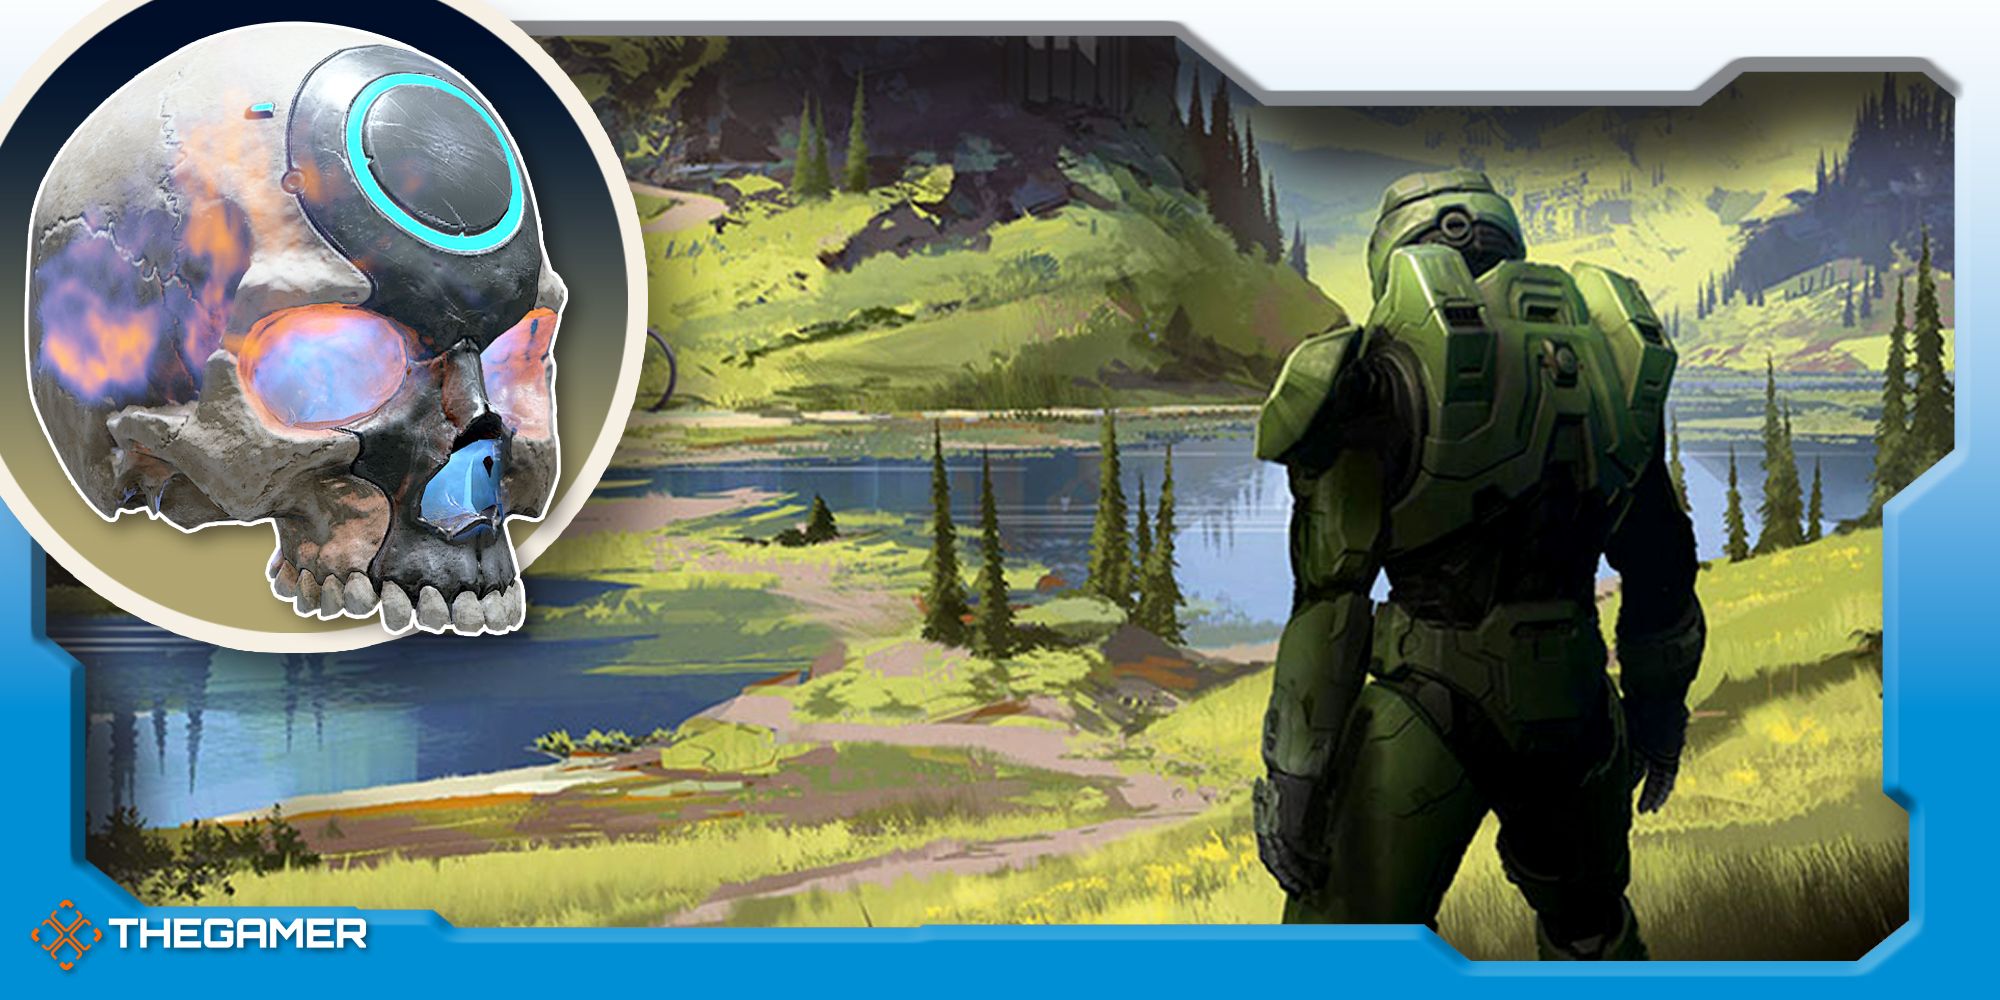 Game artwork and figure from Halo Infinite.